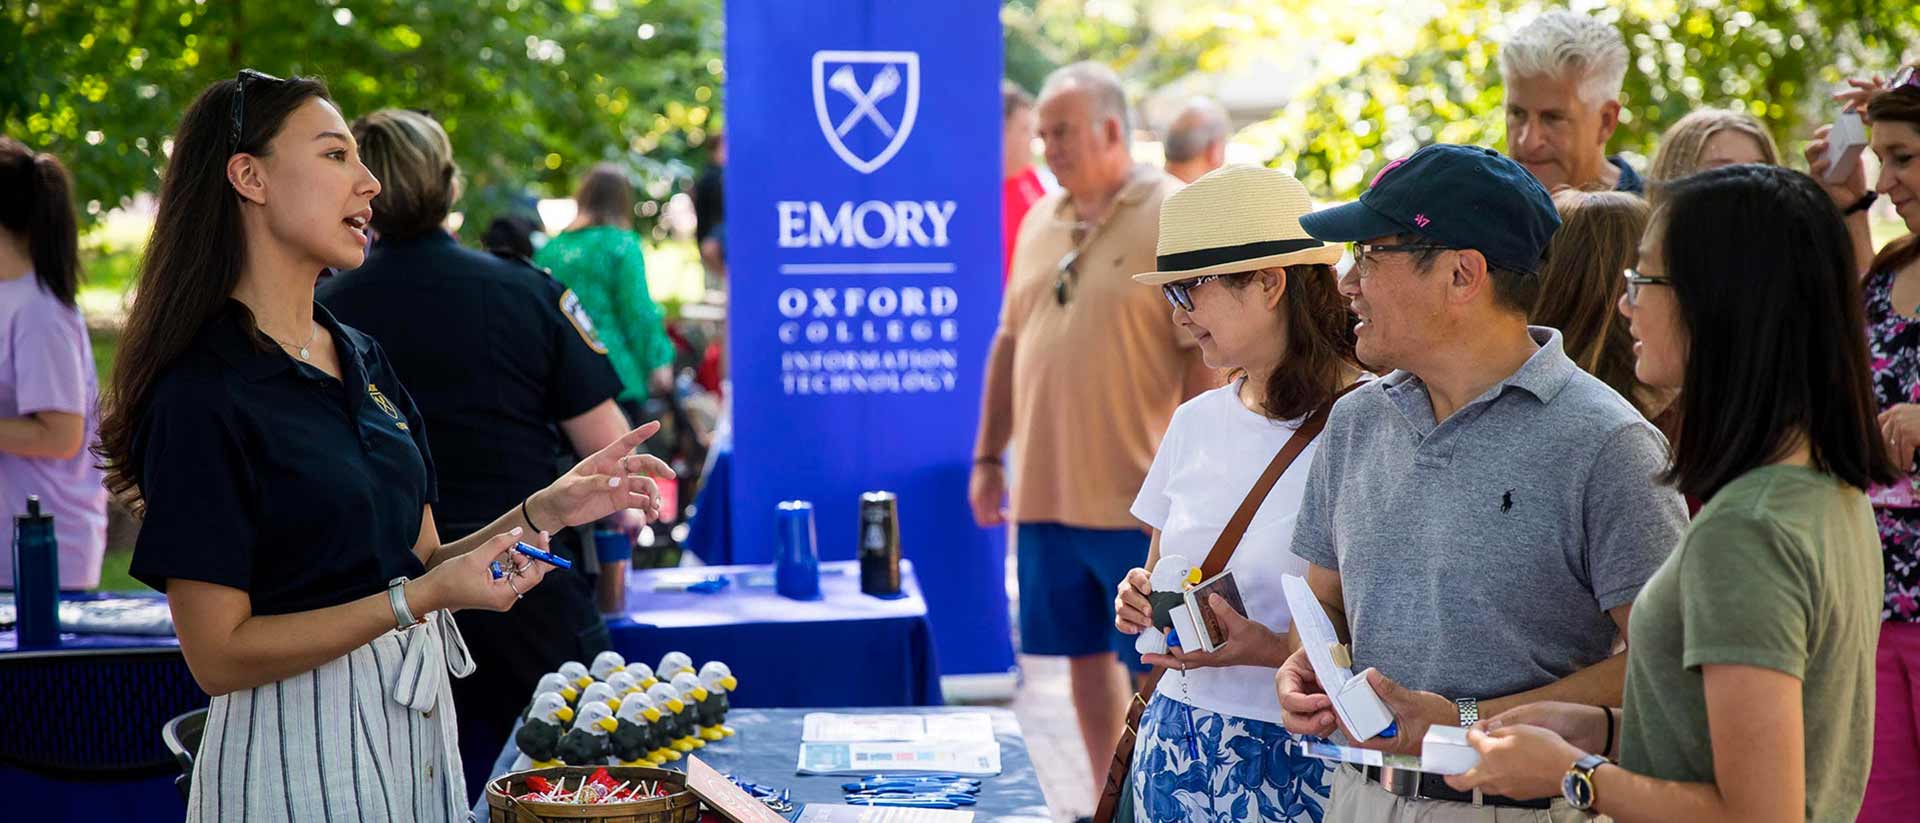 Parents engage with information at Oxford orientation.